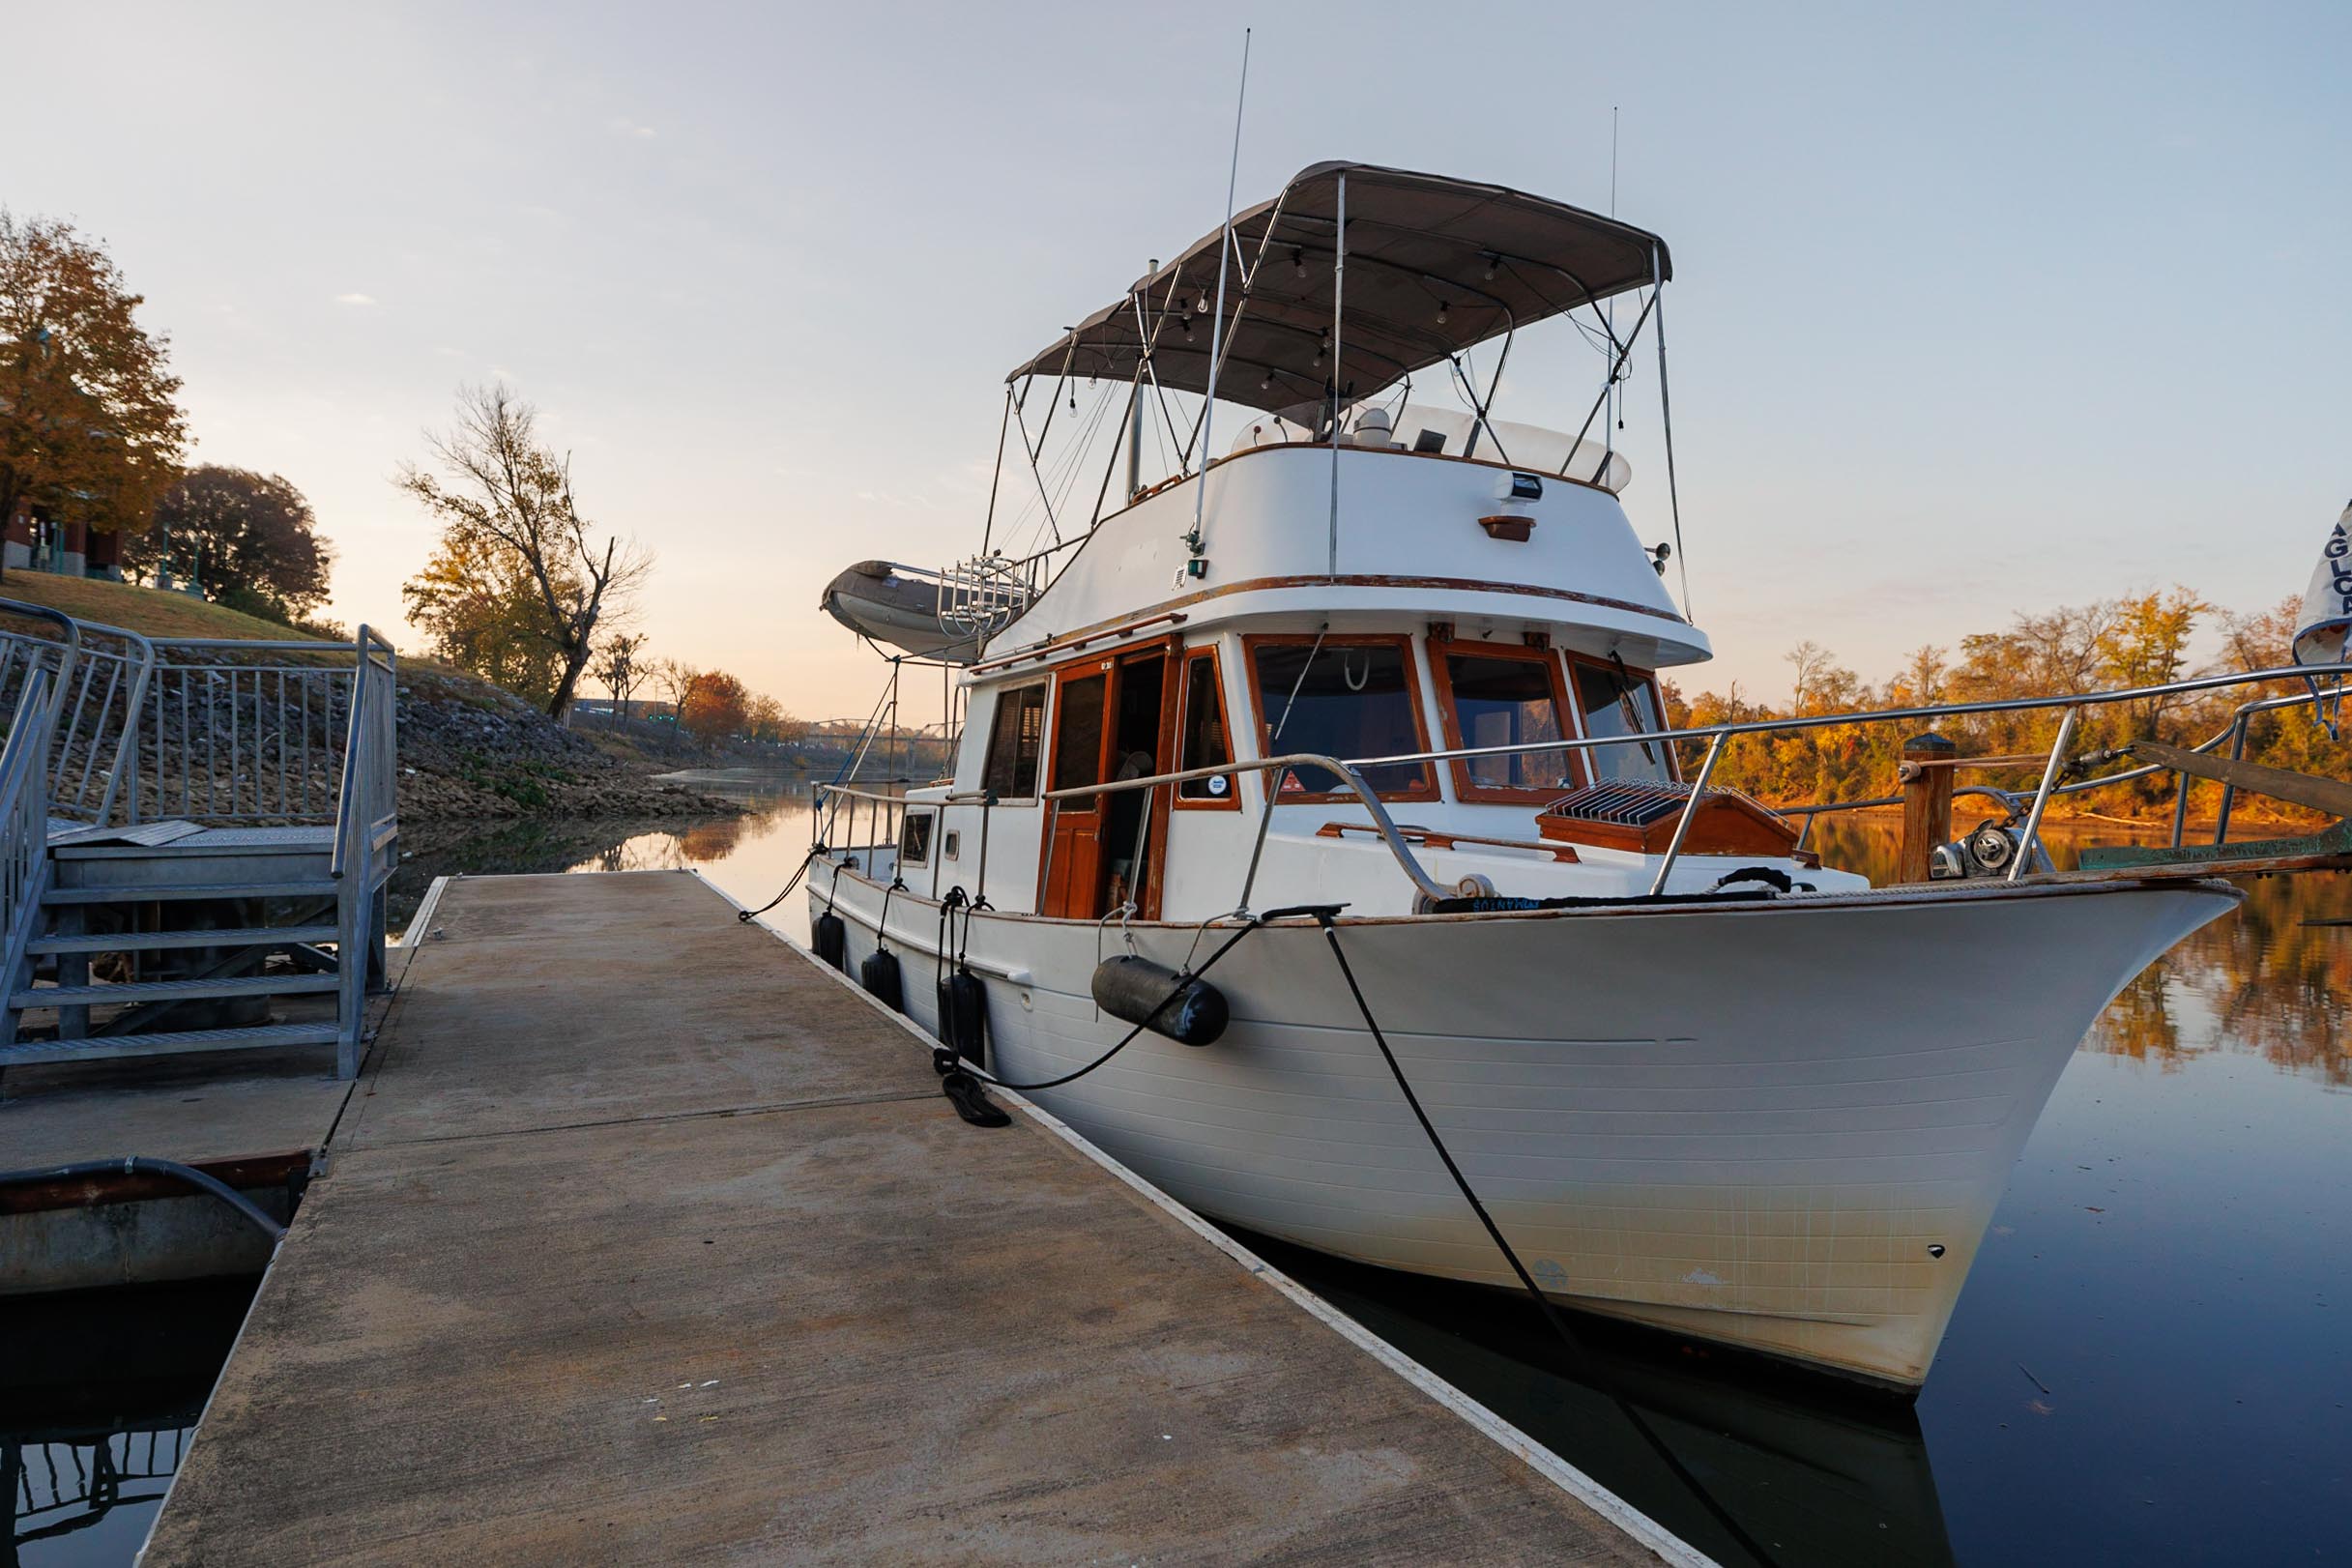 Visiting Clarksville, Tennessee by Boat